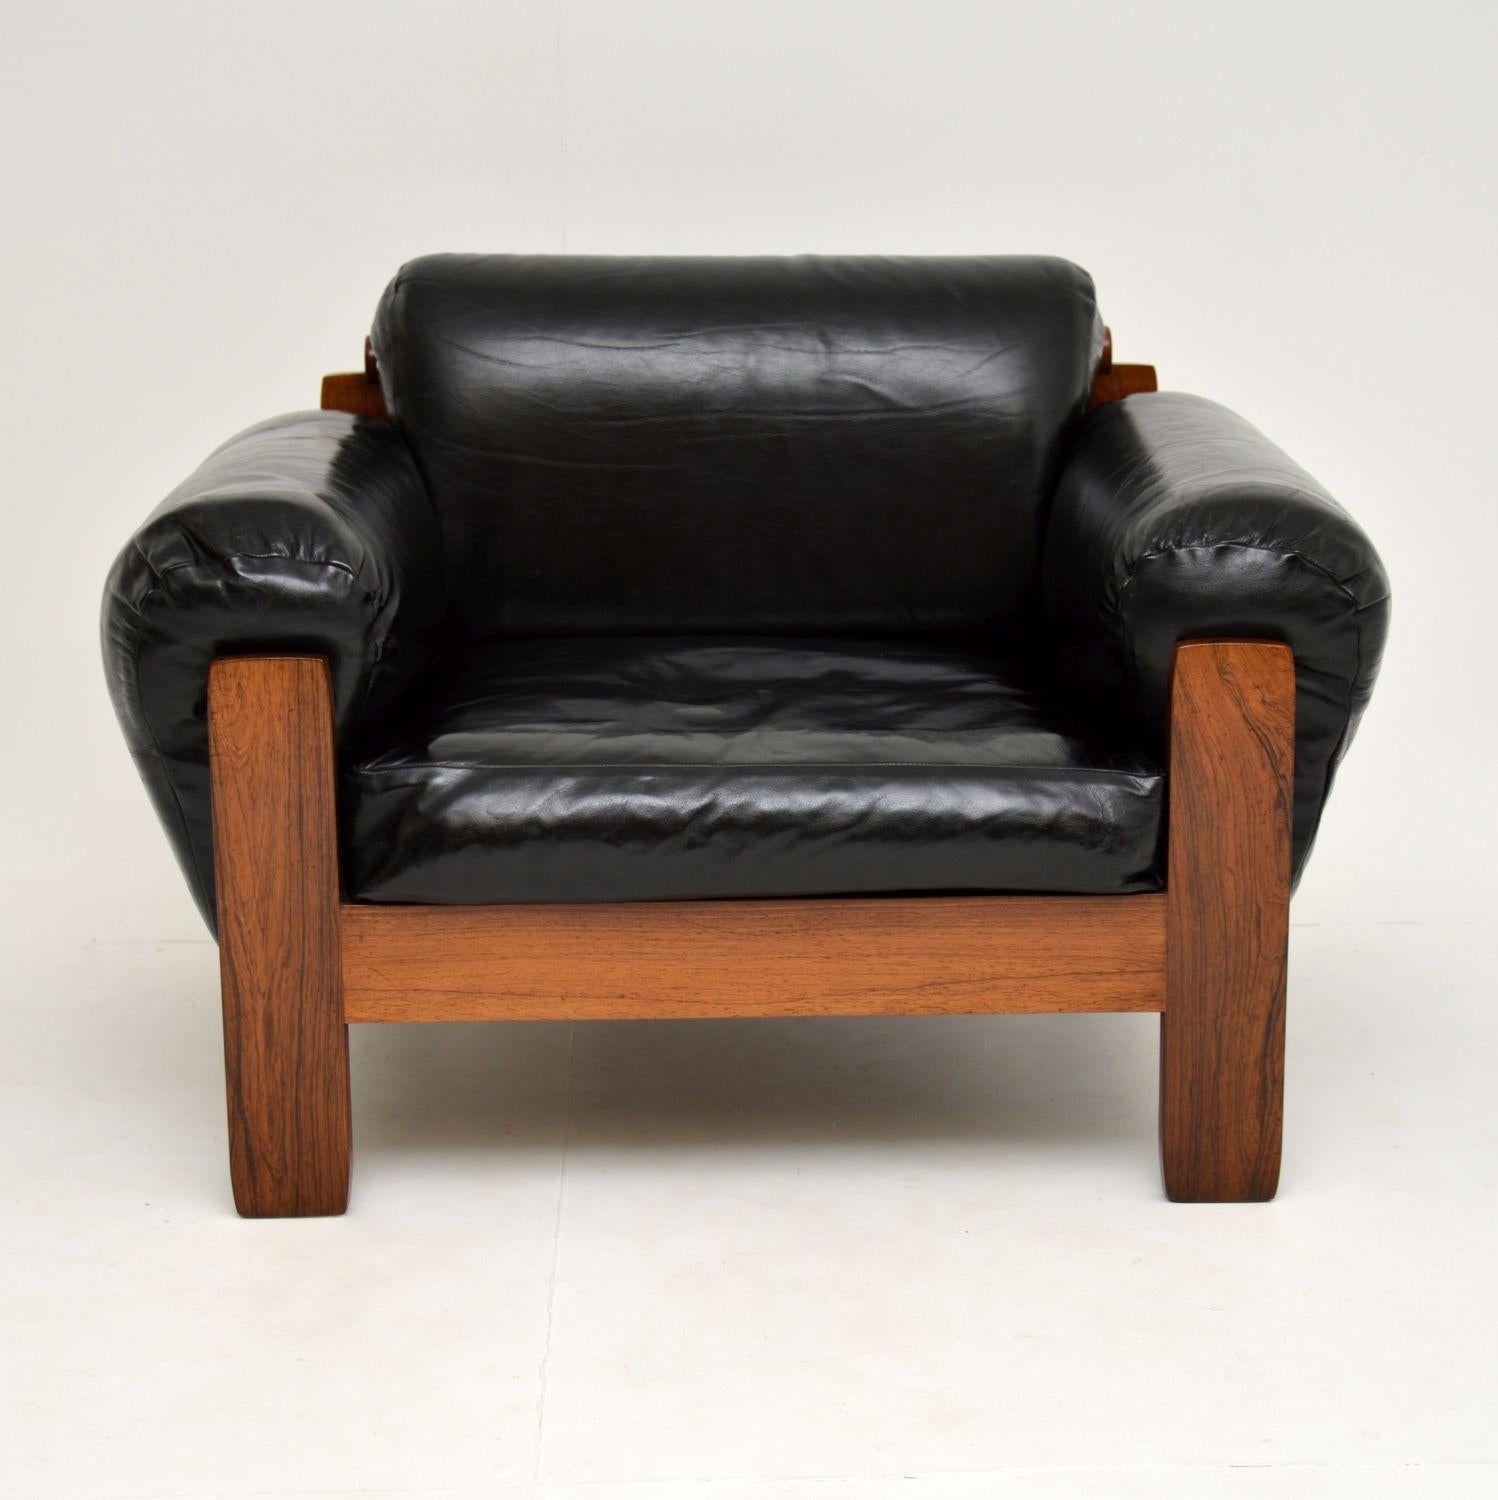 A stylish and unusual vintage armchair in black leather, with a beautiful wood frame. This was made in Denmark and it dates from circa 1960s.

It is of great quality and has a stunning design, with thick padded cushions on the seat, back and